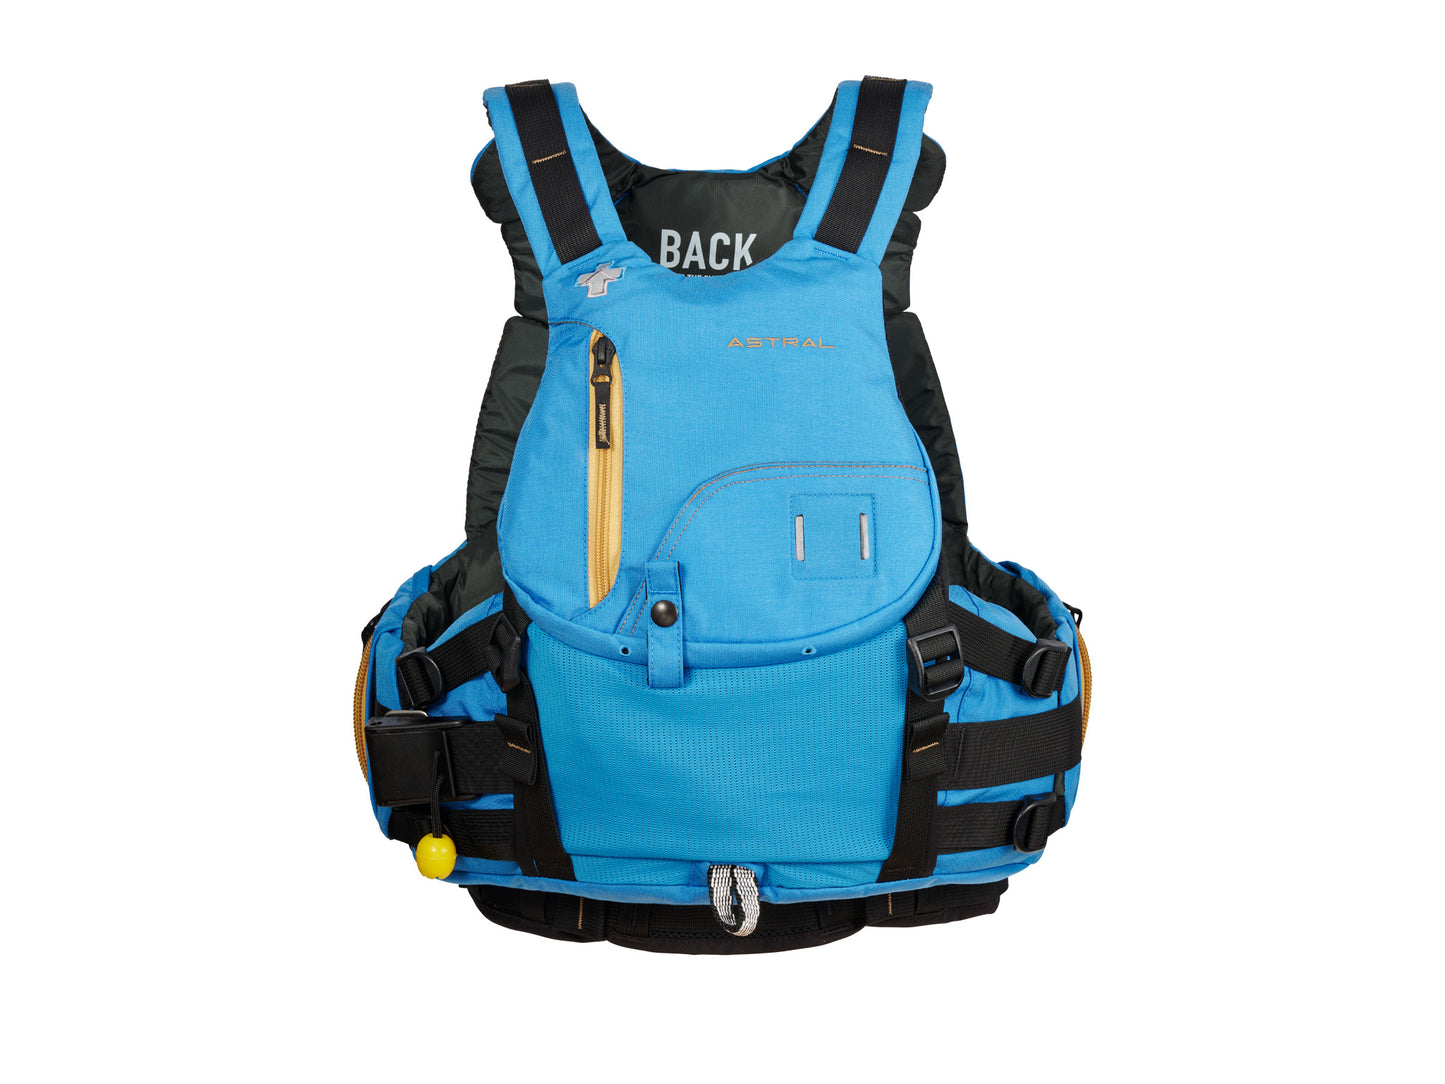 A blue Indus High Float Rescue PFD with an orange strap and FoamTectonics™ technology by Astral.